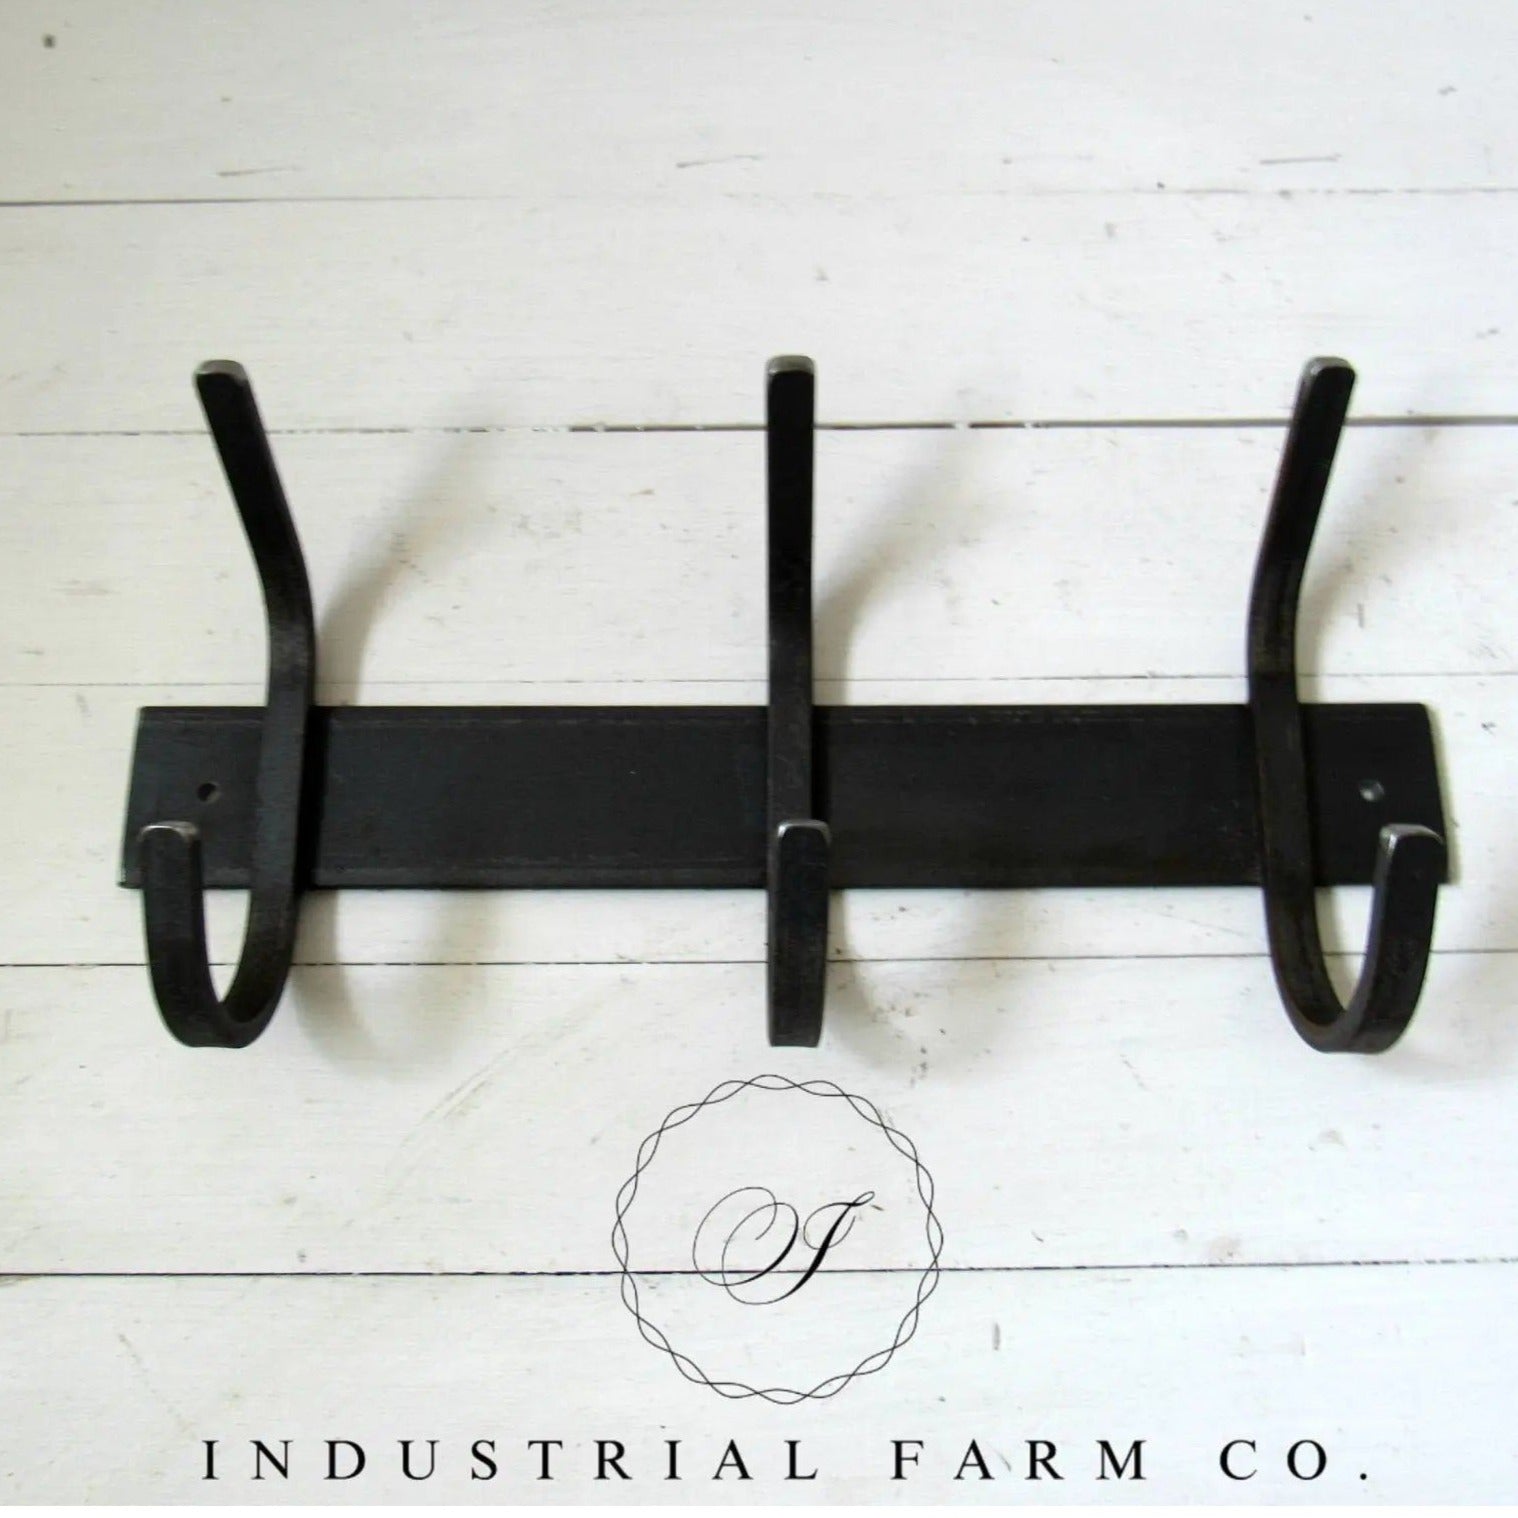 The Eastman Coat & Hook Rack - Industrial Farm Co Made in the USA